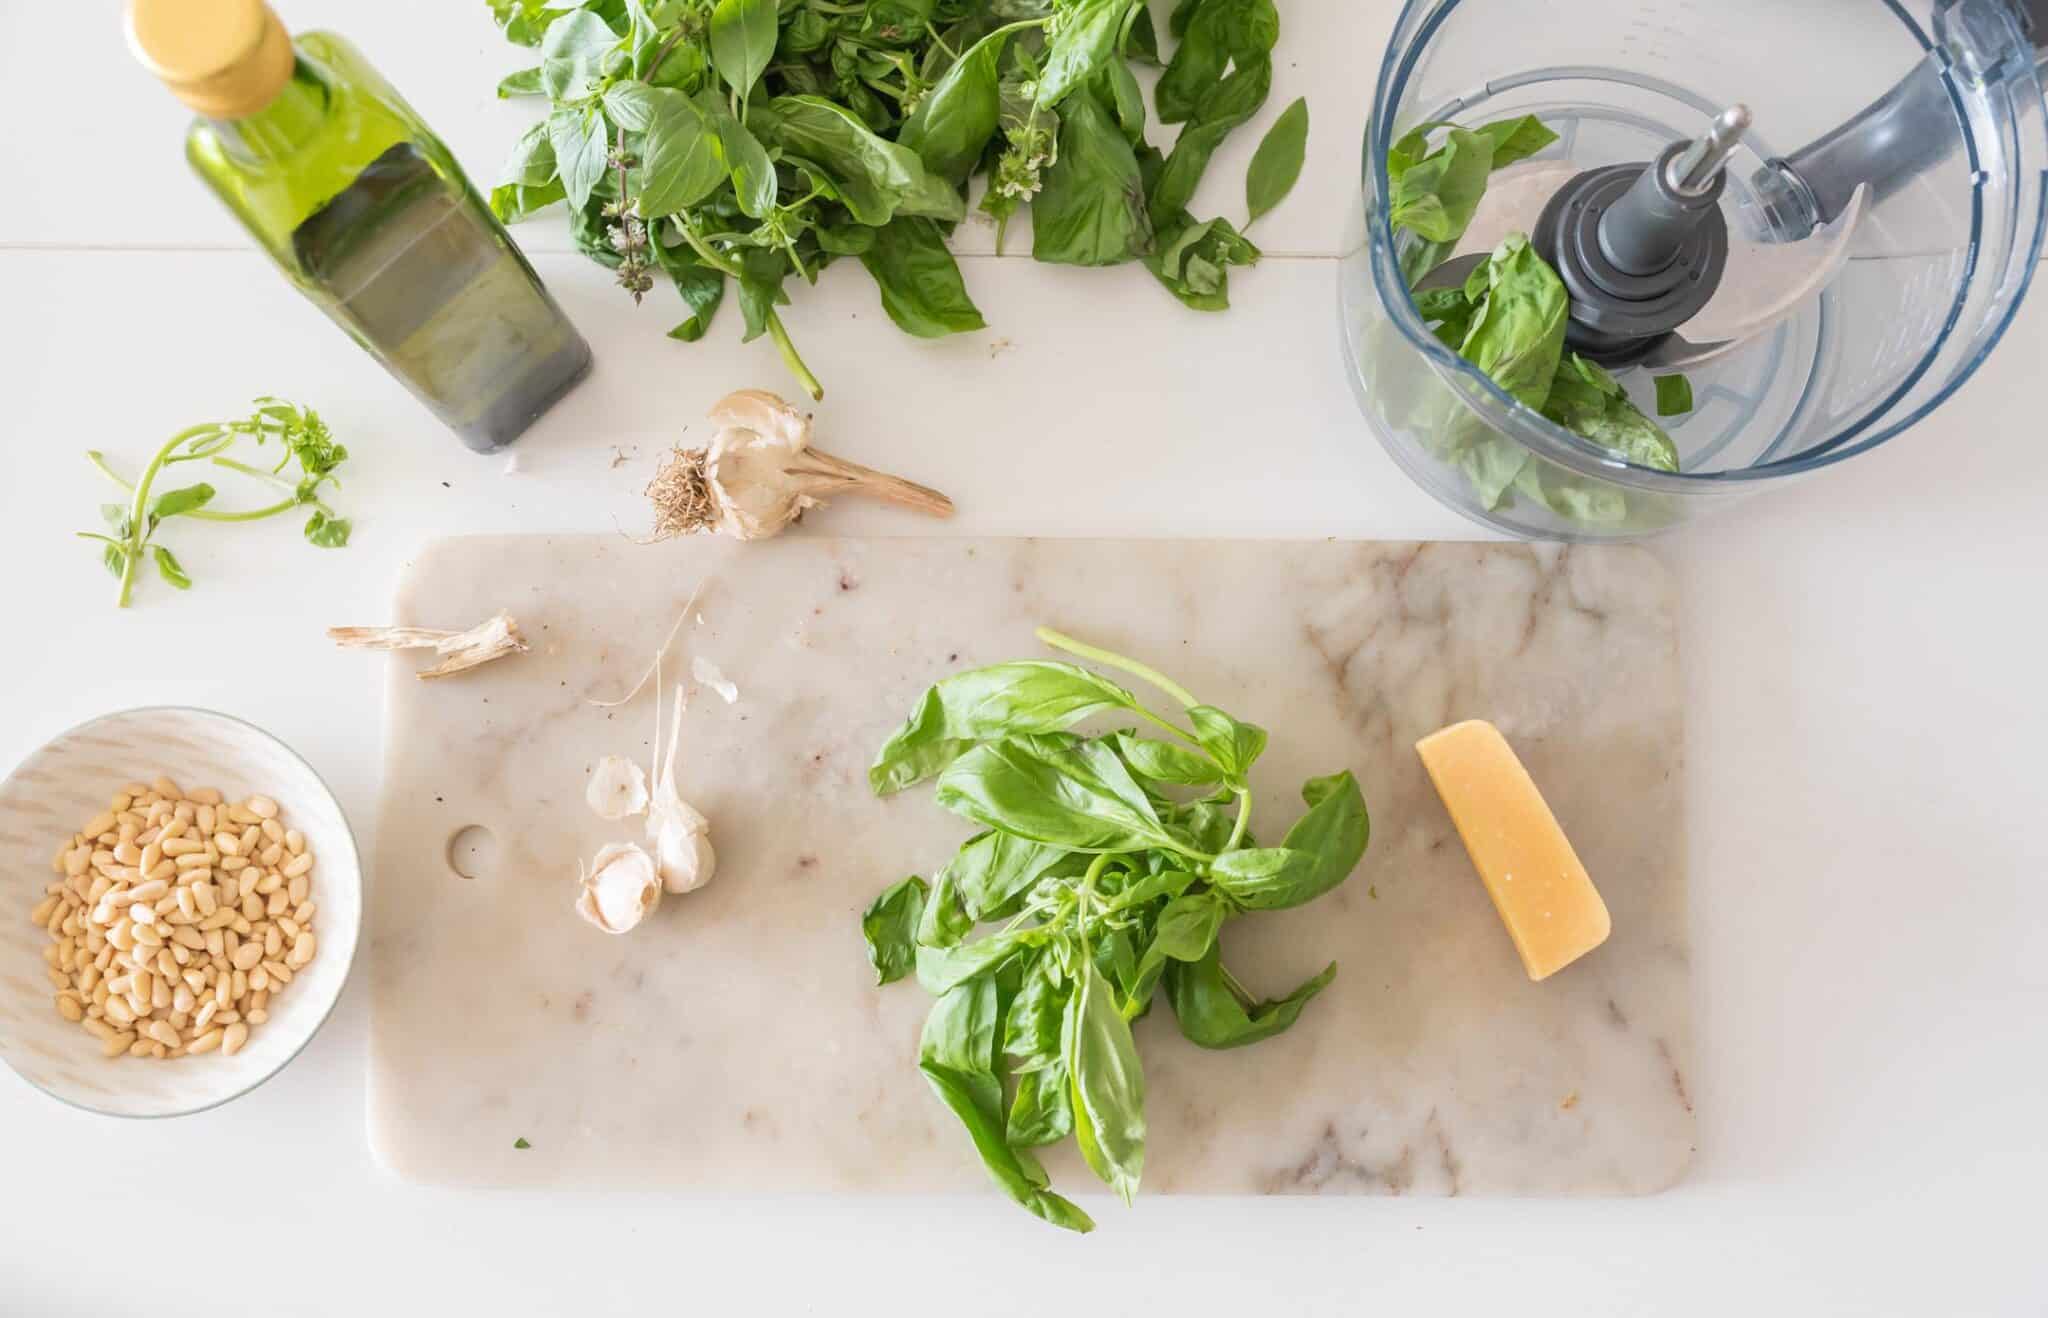 Ingredients For Basil Pesto From Above